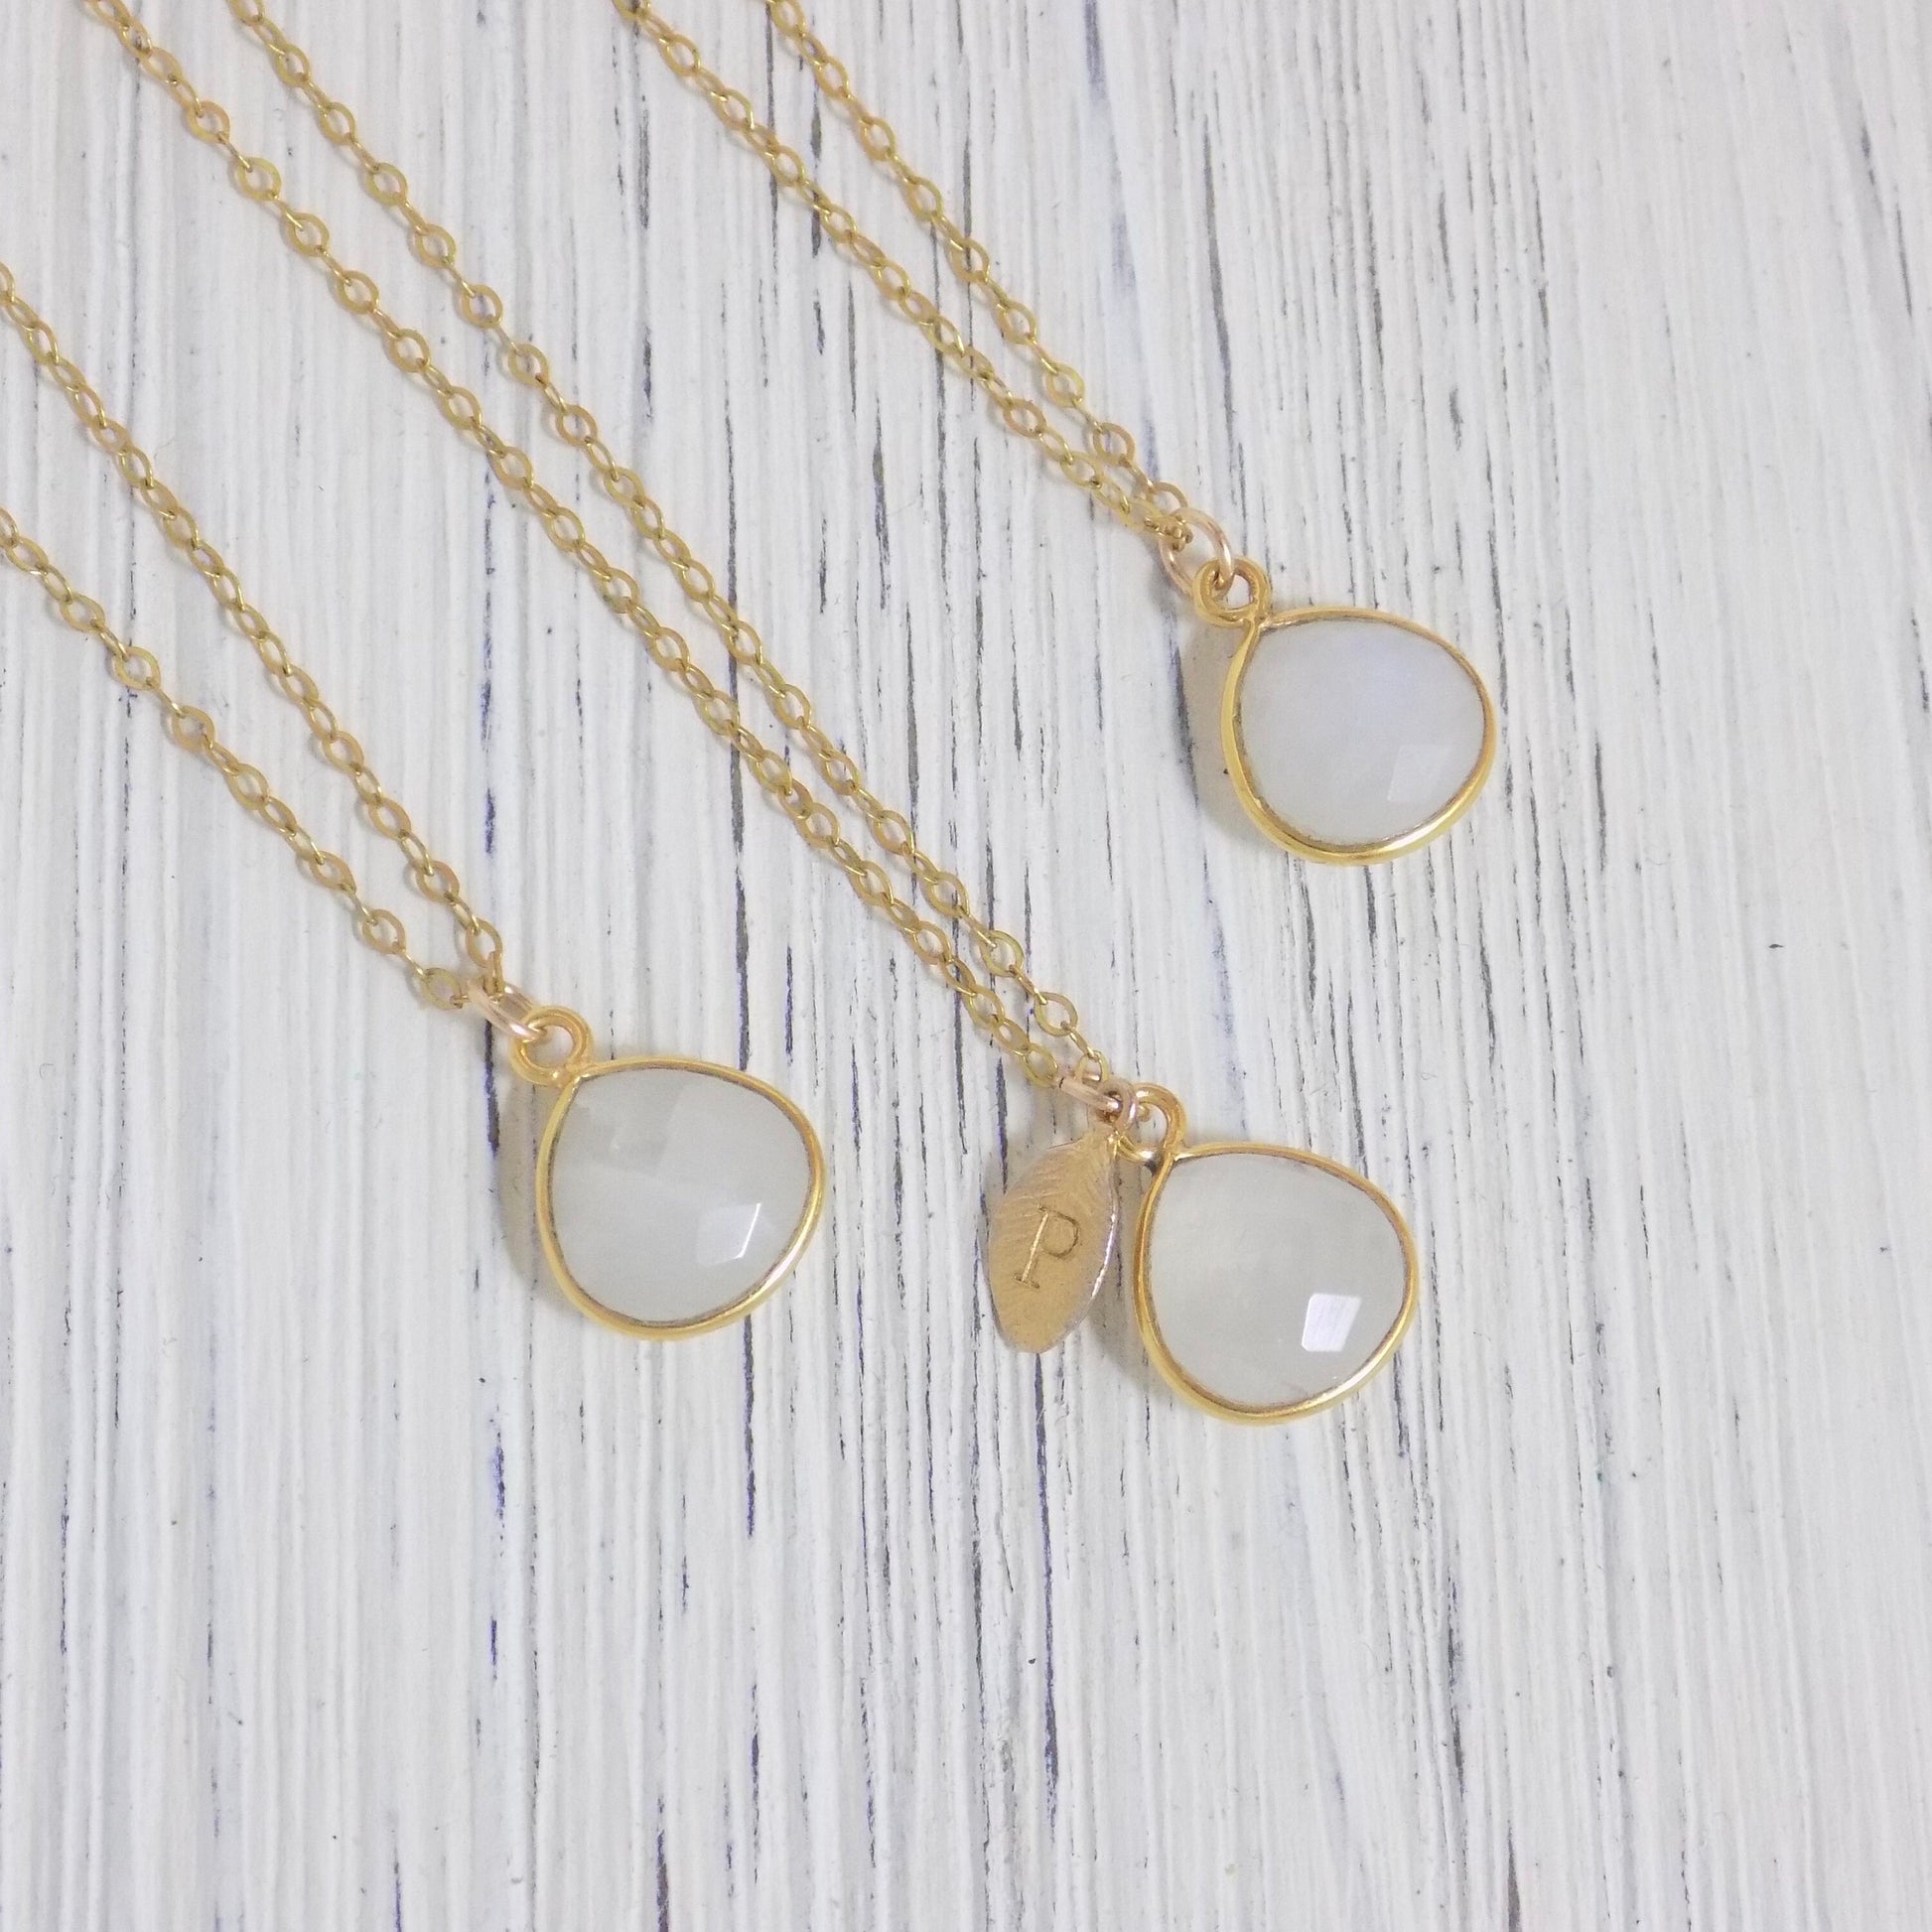 White Moonstone Necklace, Personalized Moonstone Pendant Gold, Custom Initial Jewelry, Mothers Day Gifts For Her, M3-04